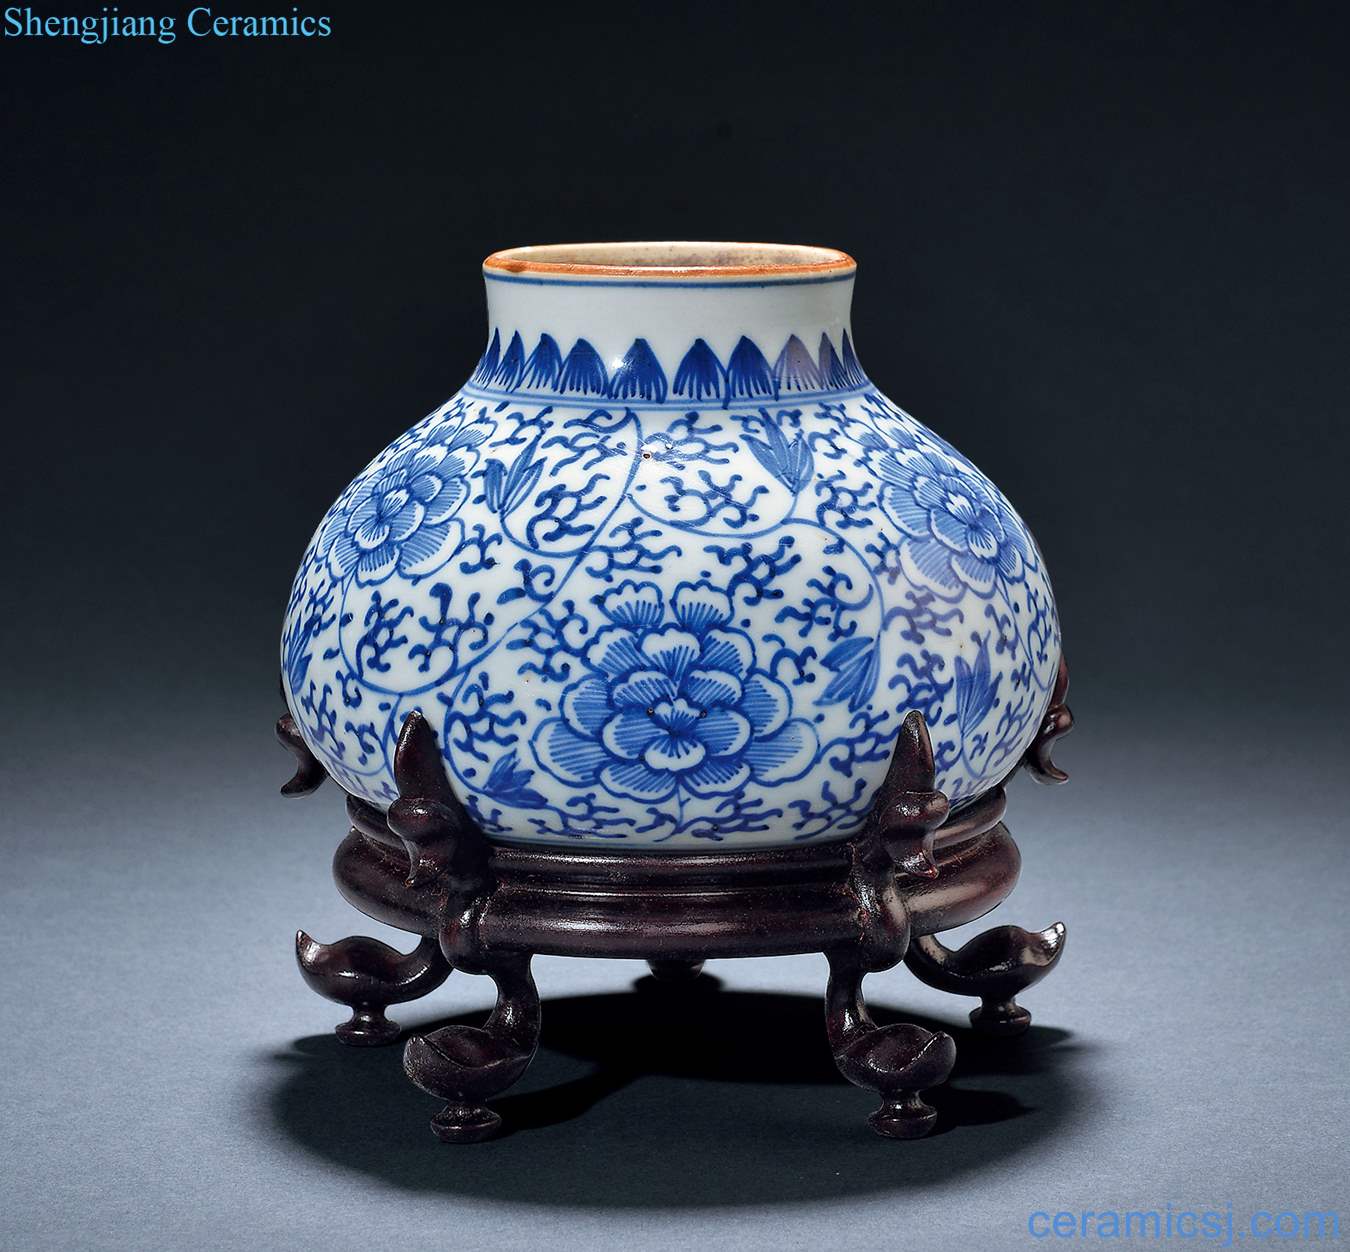 The qing emperor kangxi Blue and white flower pot around branches